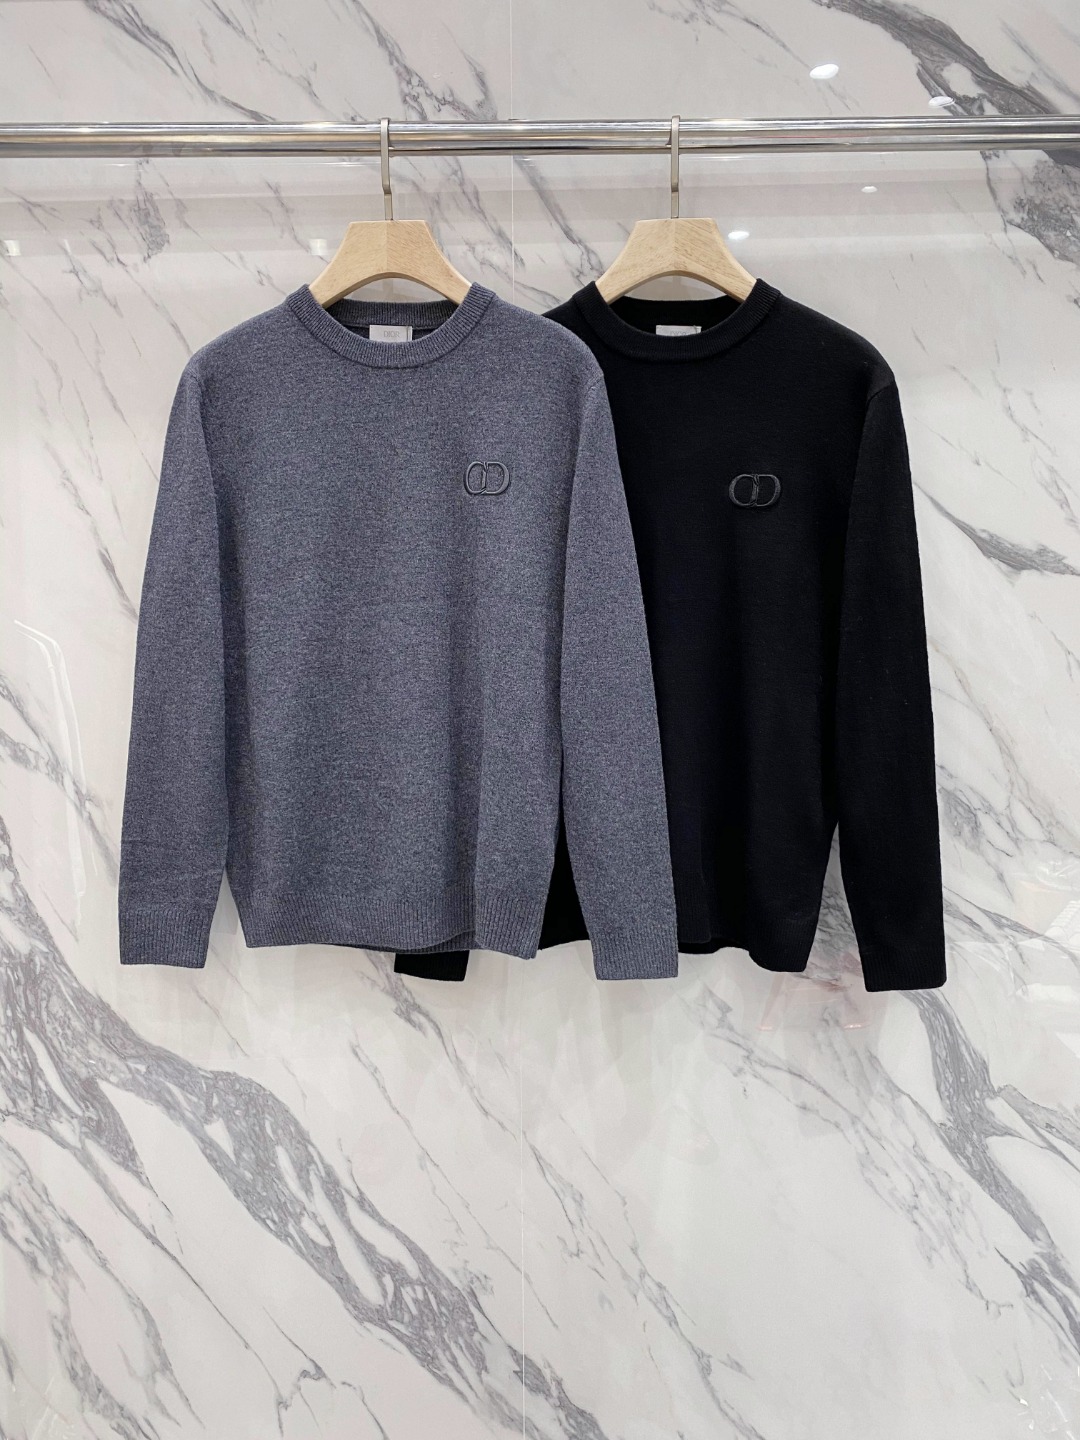 Dior Clothing Sweatshirts Cashmere Spandex Wool Fall/Winter Collection